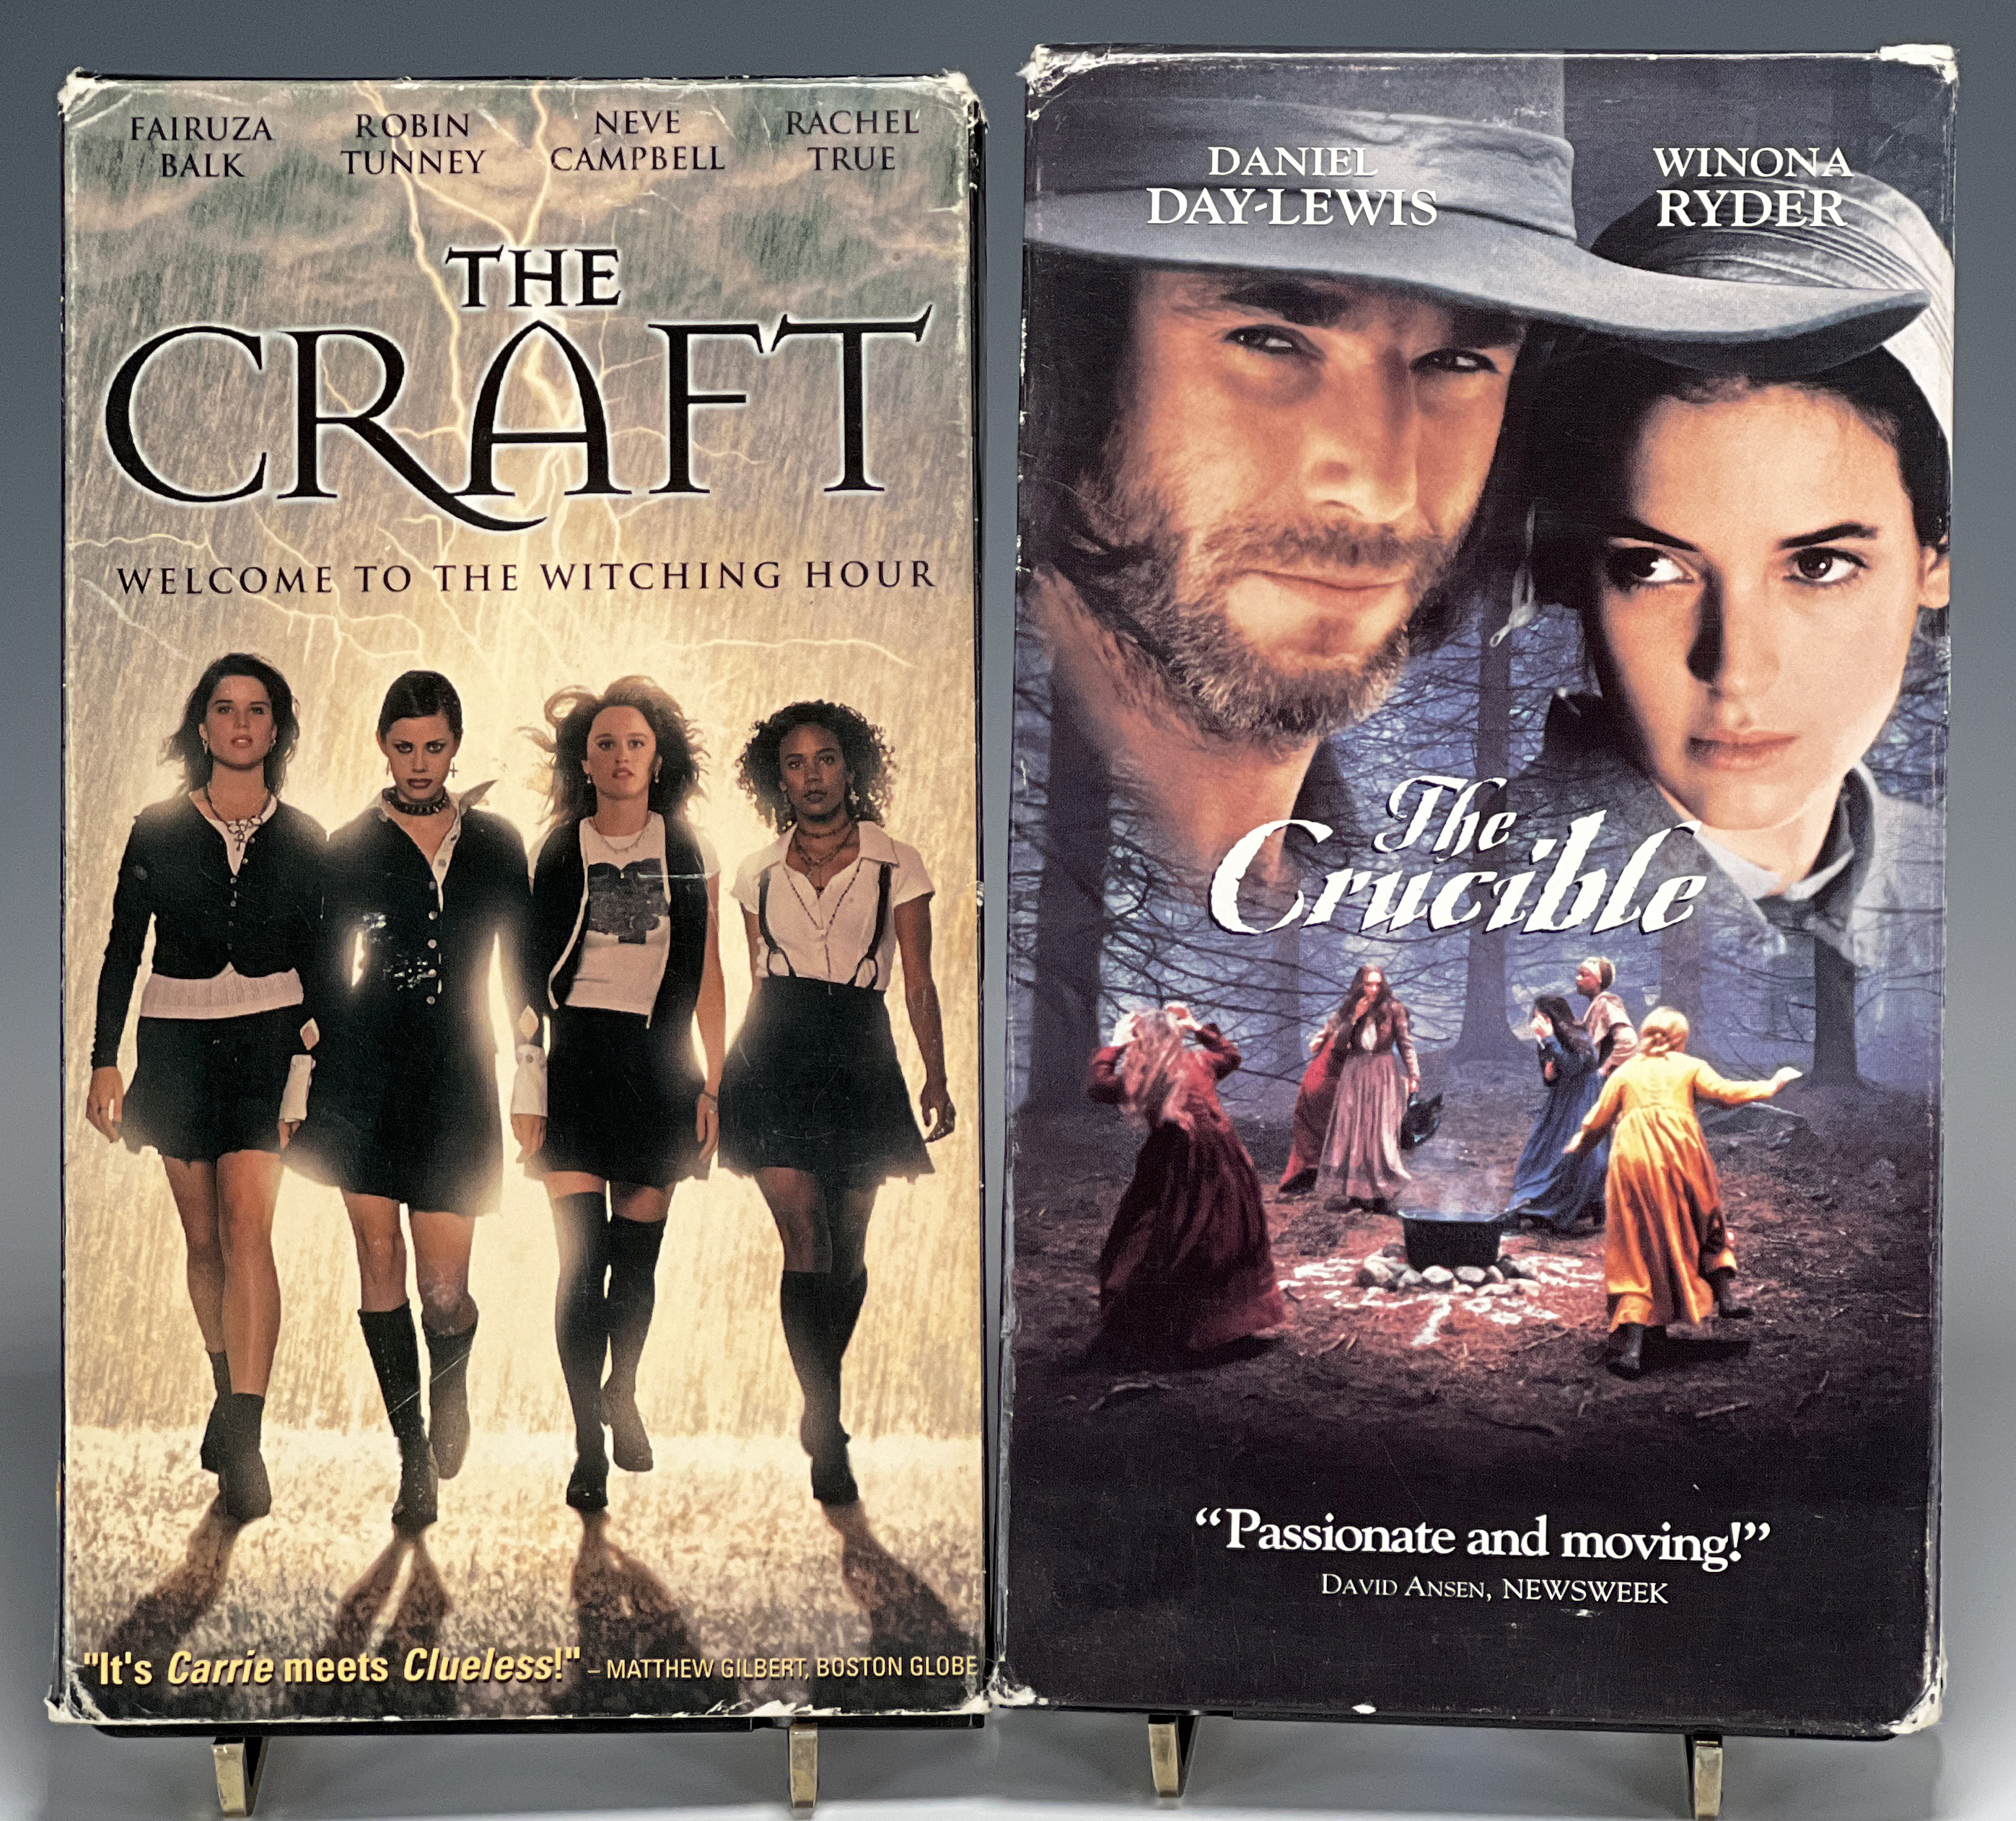 The Craft & The Crucible Vhs Daniel Day-Lewis image 1